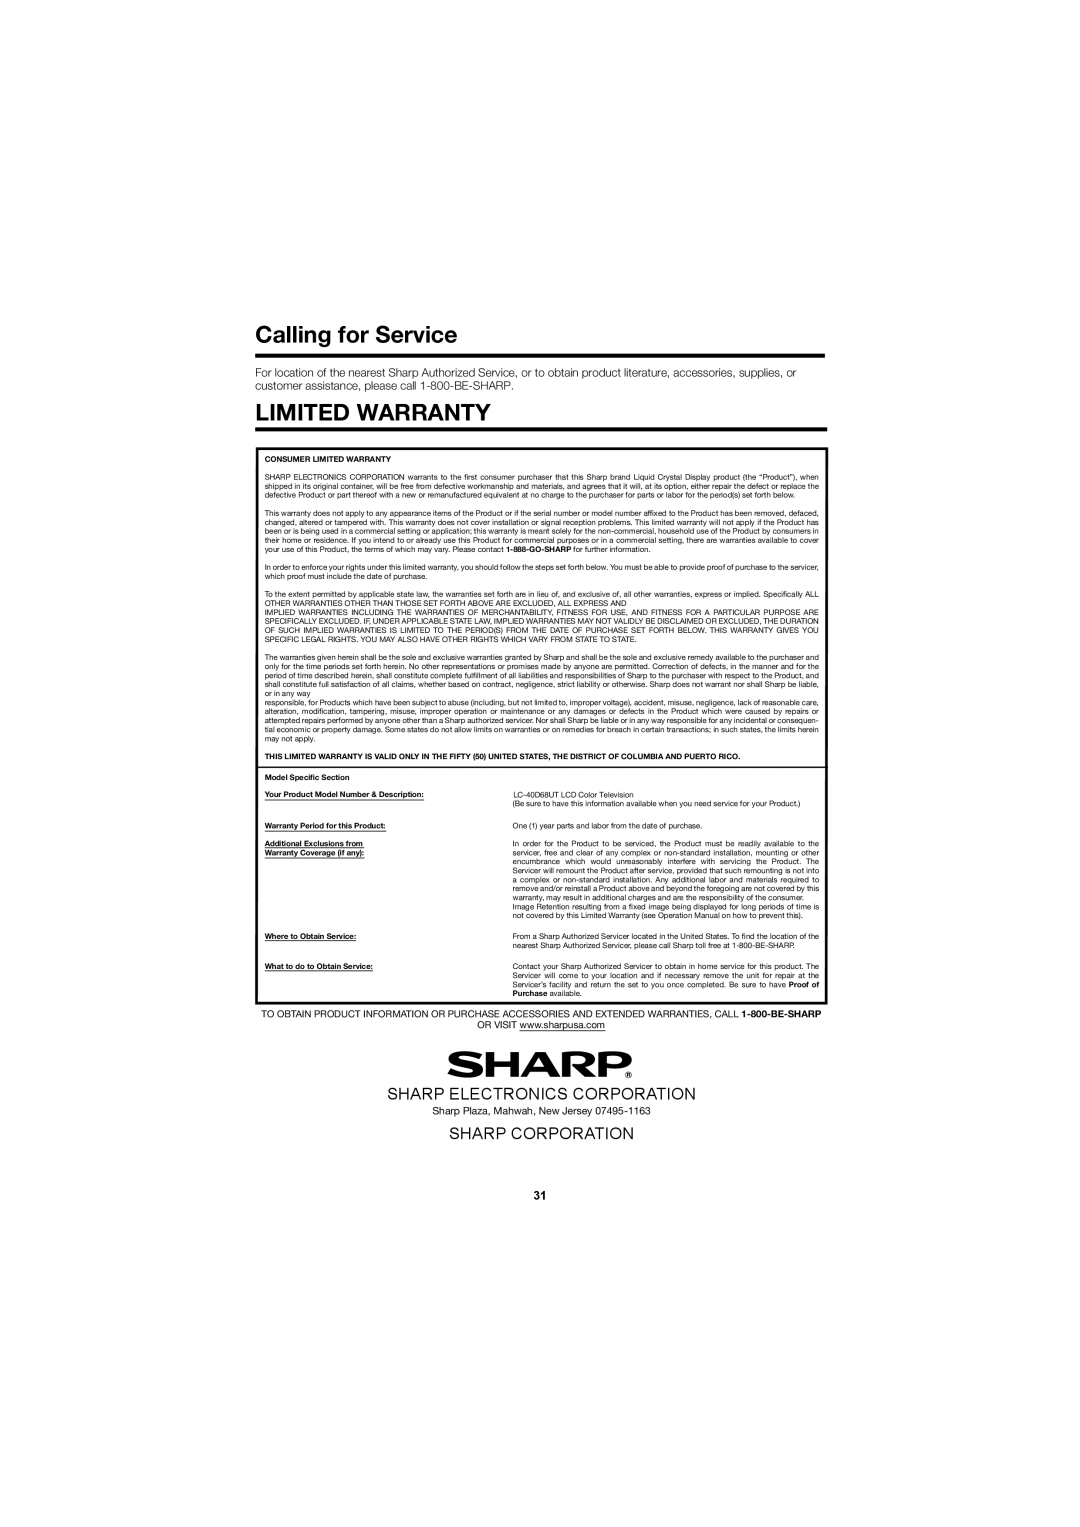 Sharp LC-40D68UT operation manual Calling for Service, Limited Warranty 